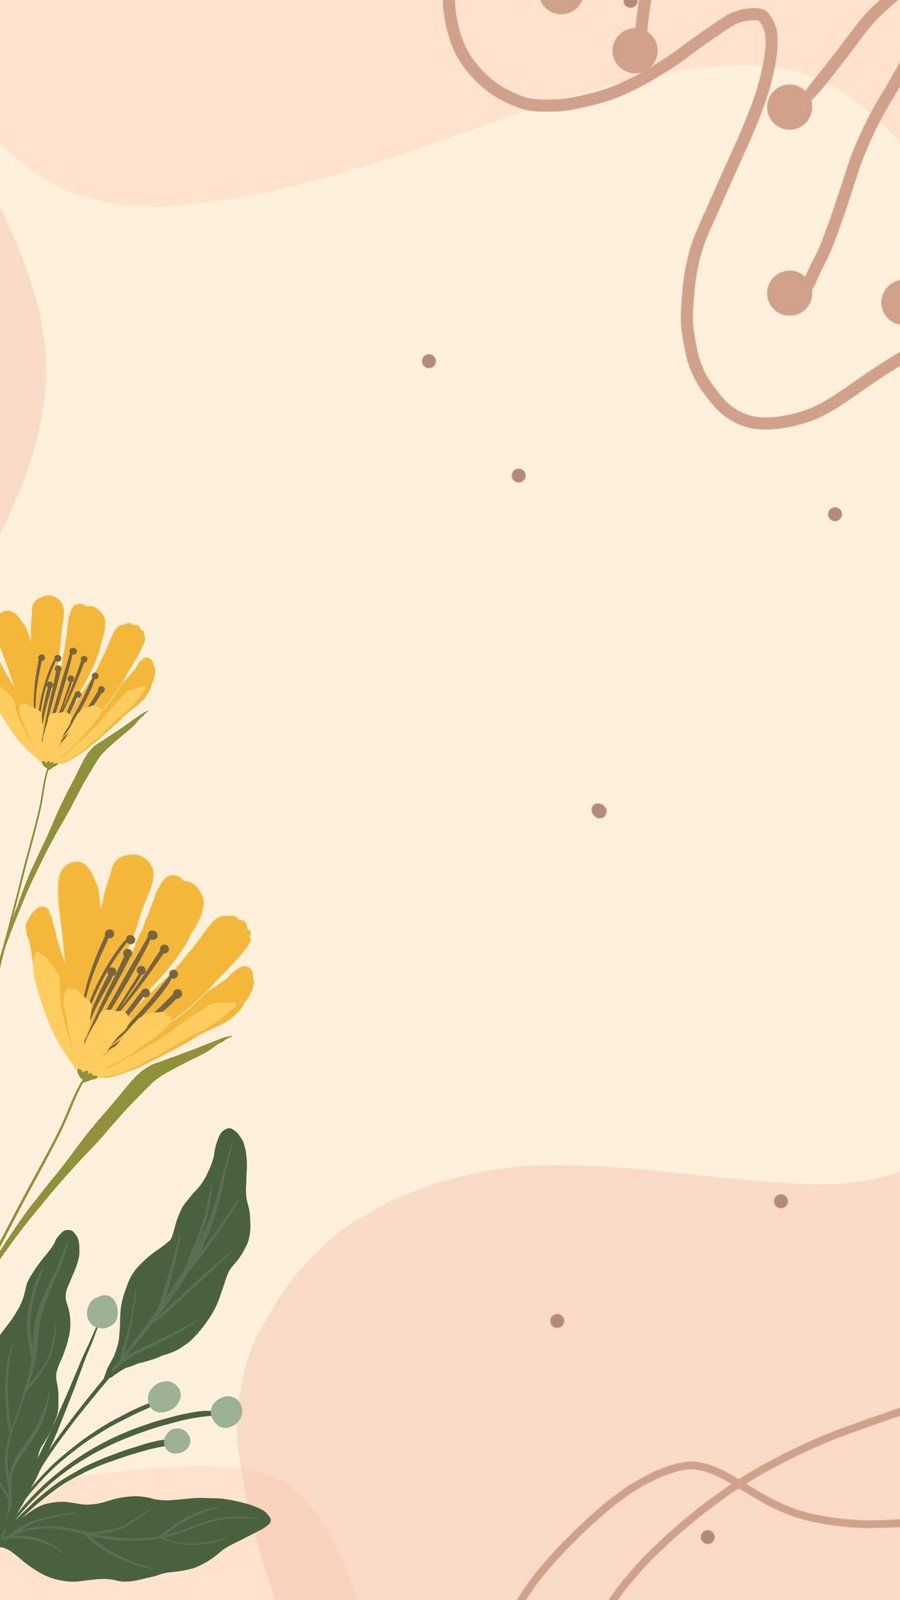 Download this free vector about hand drawn floral elements, and discover more than 10 million professional graphic resources on Freepik. - Beige, Android, books, pastel minimalist, design, retro, pastel yellow, vintage, magic, abstract, marble